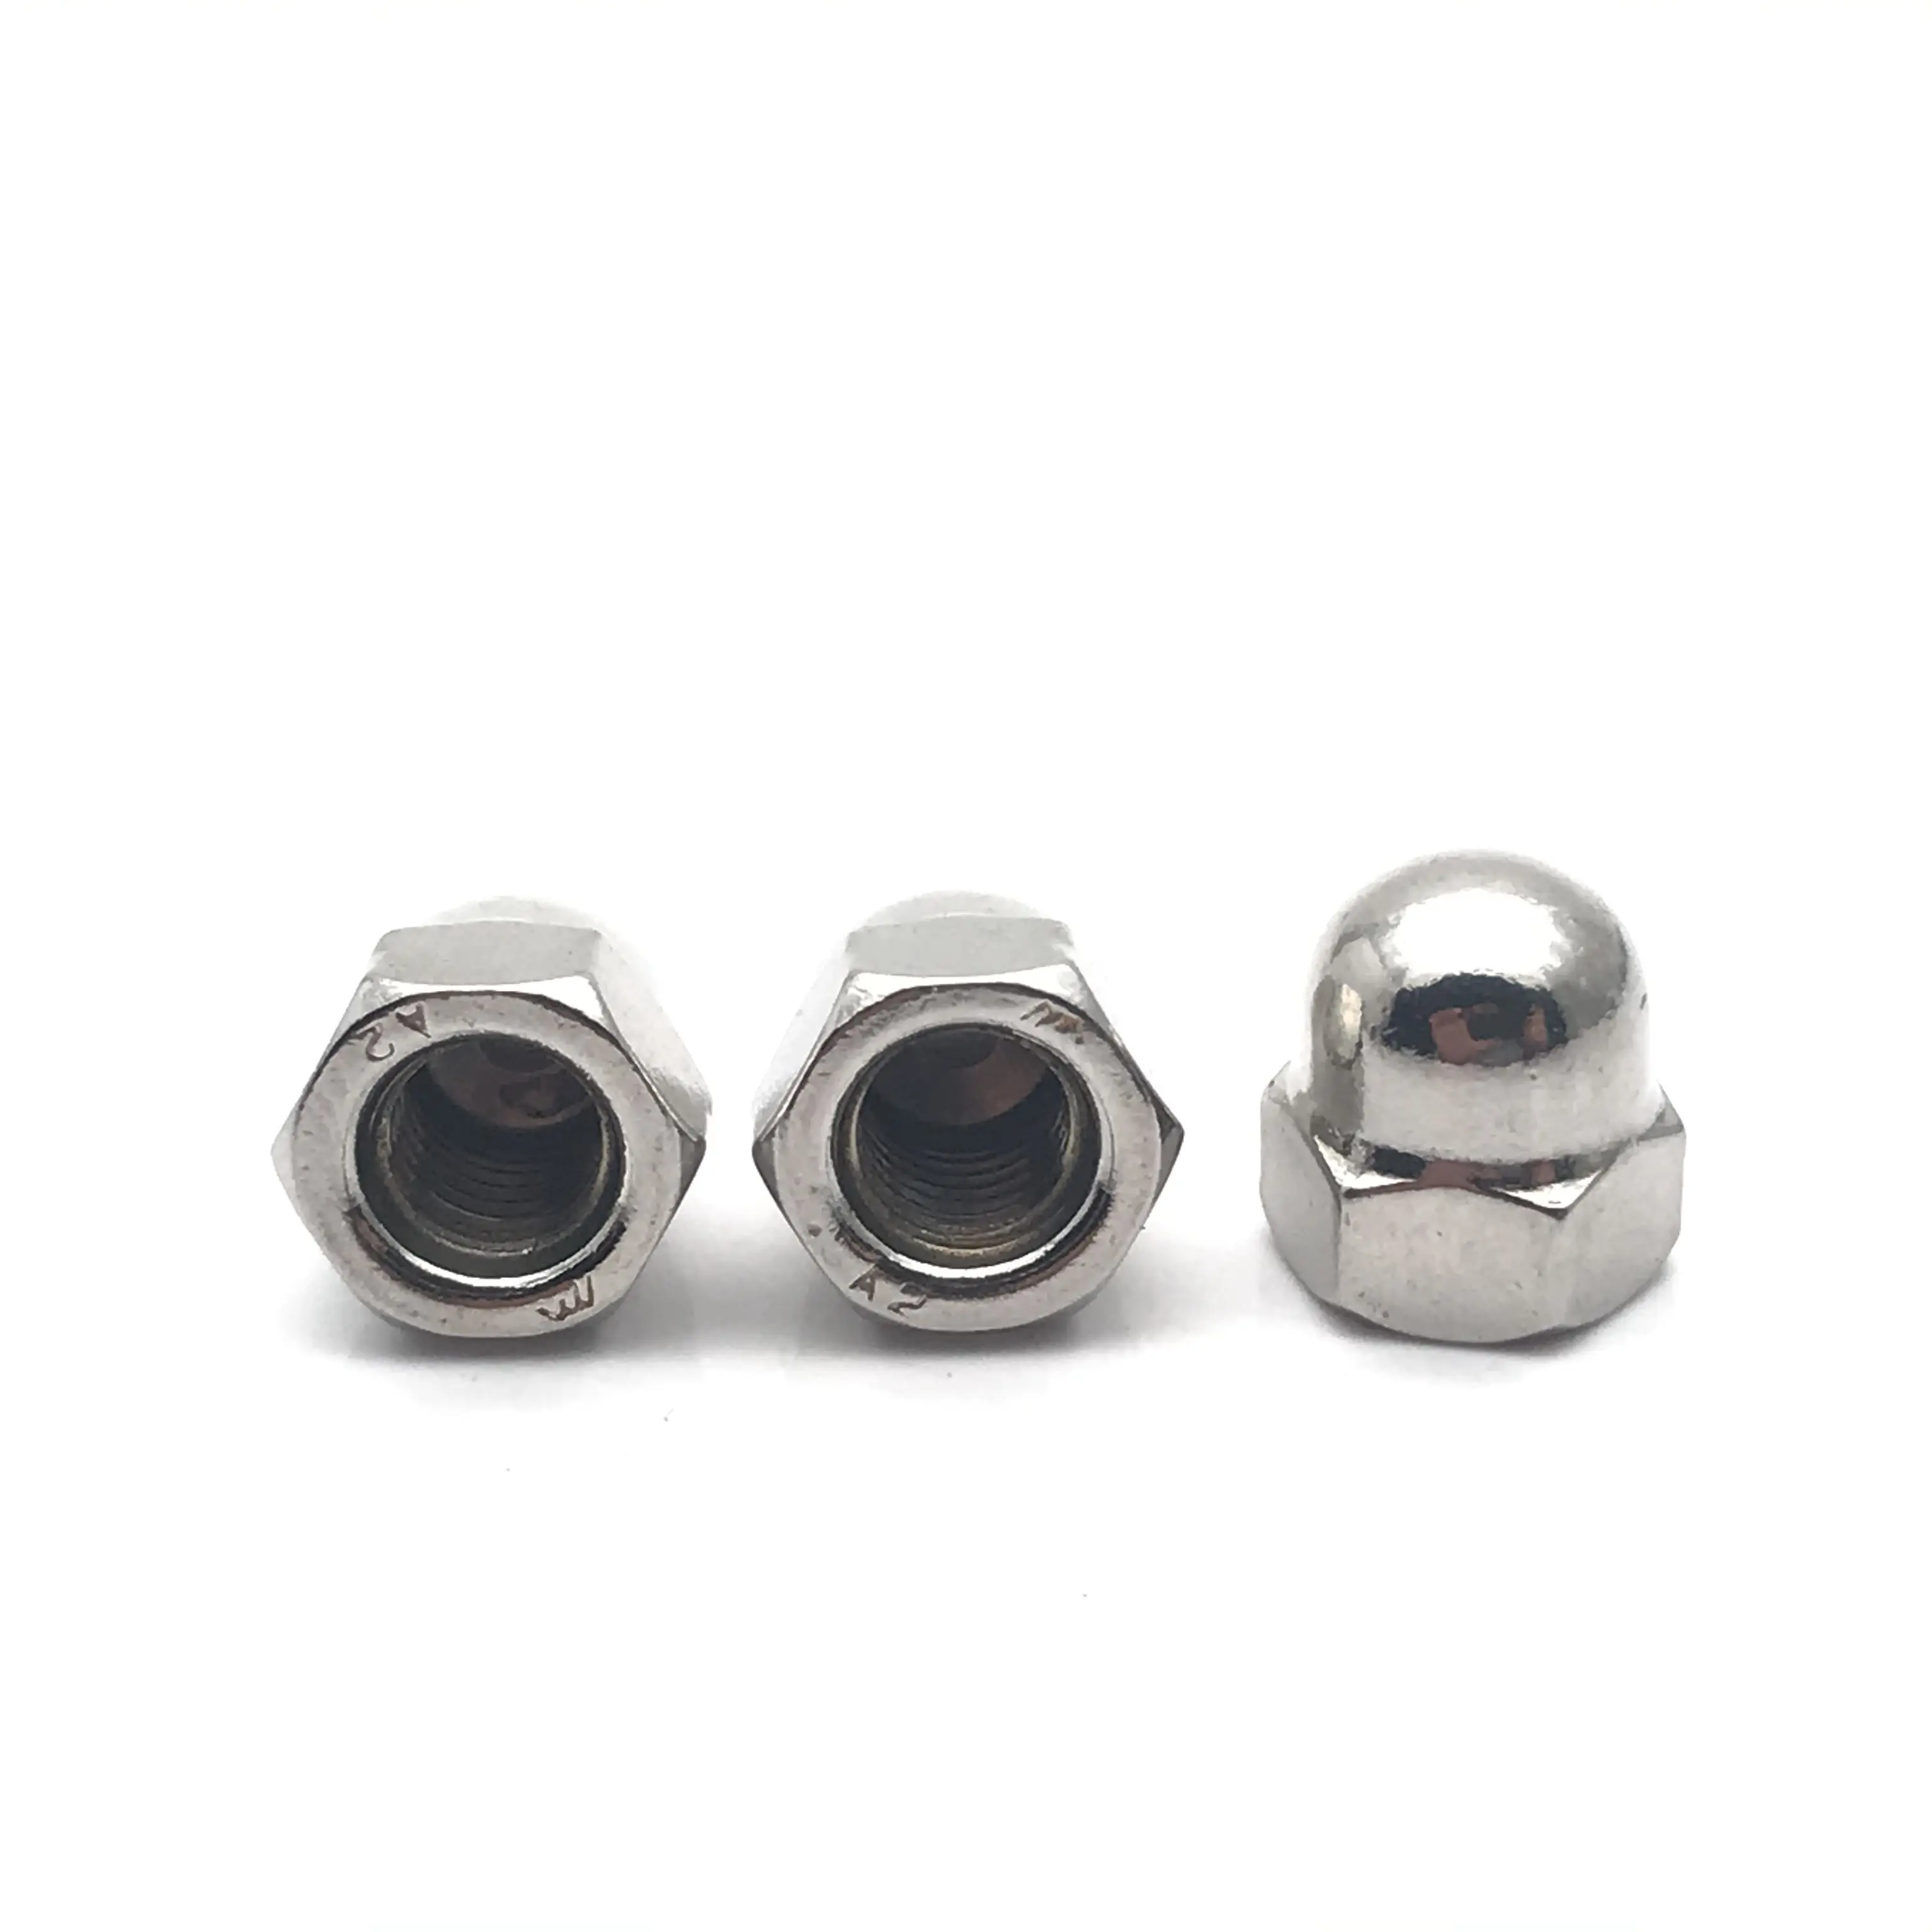 High quality M3 M4 M5 M6 M8 Hex flange cap nut stainless steel cap nuts